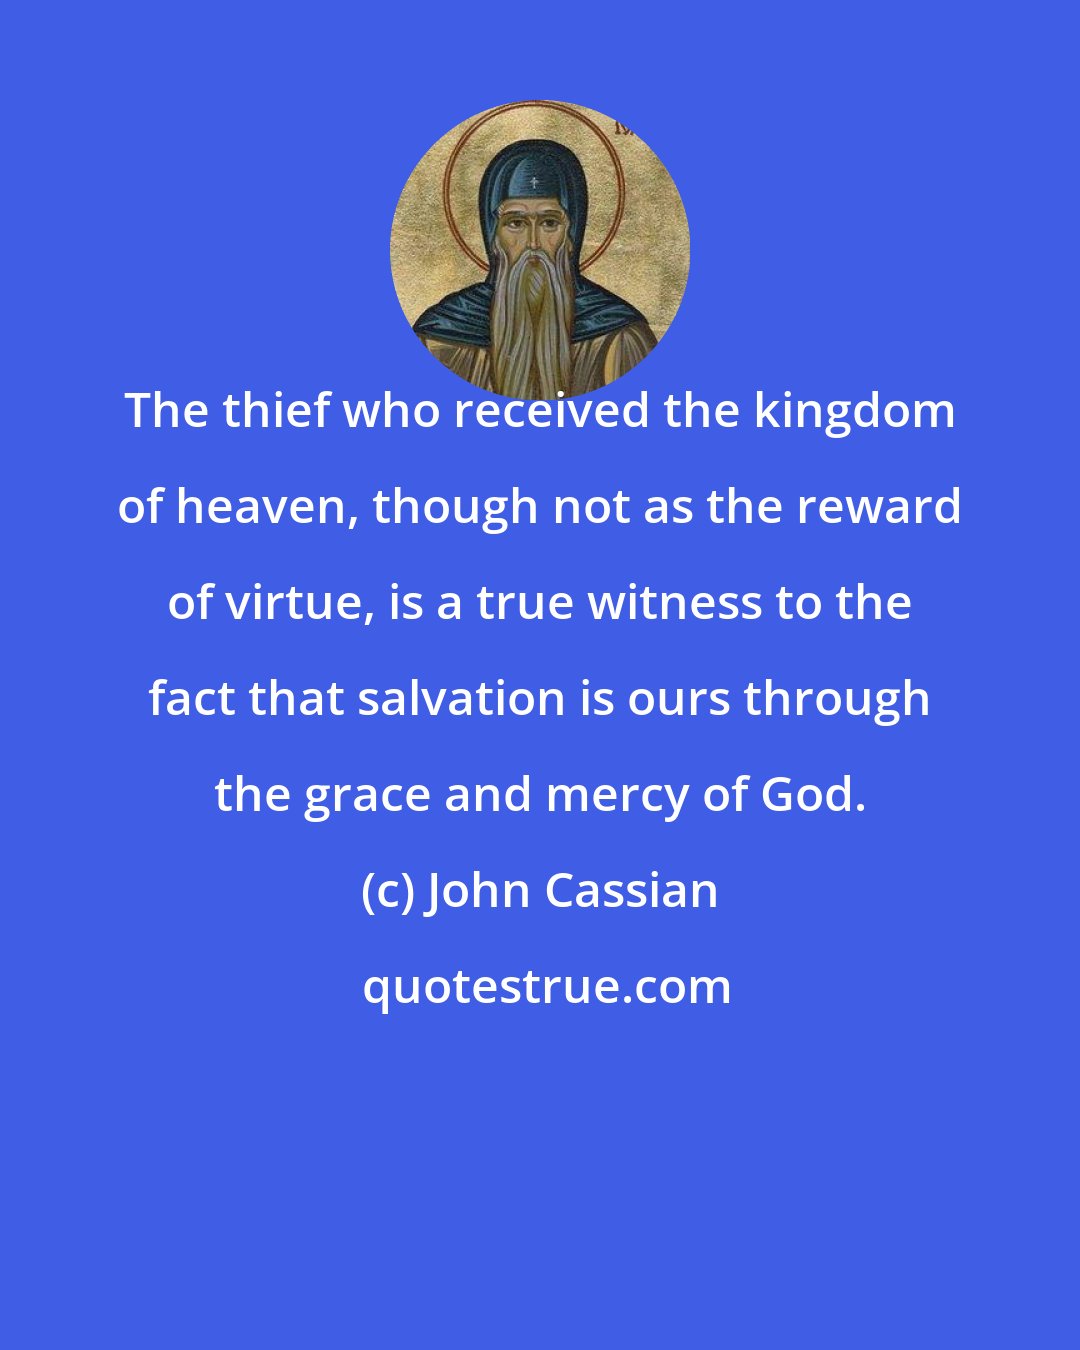 John Cassian: The thief who received the kingdom of heaven, though not as the reward of virtue, is a true witness to the fact that salvation is ours through the grace and mercy of God.